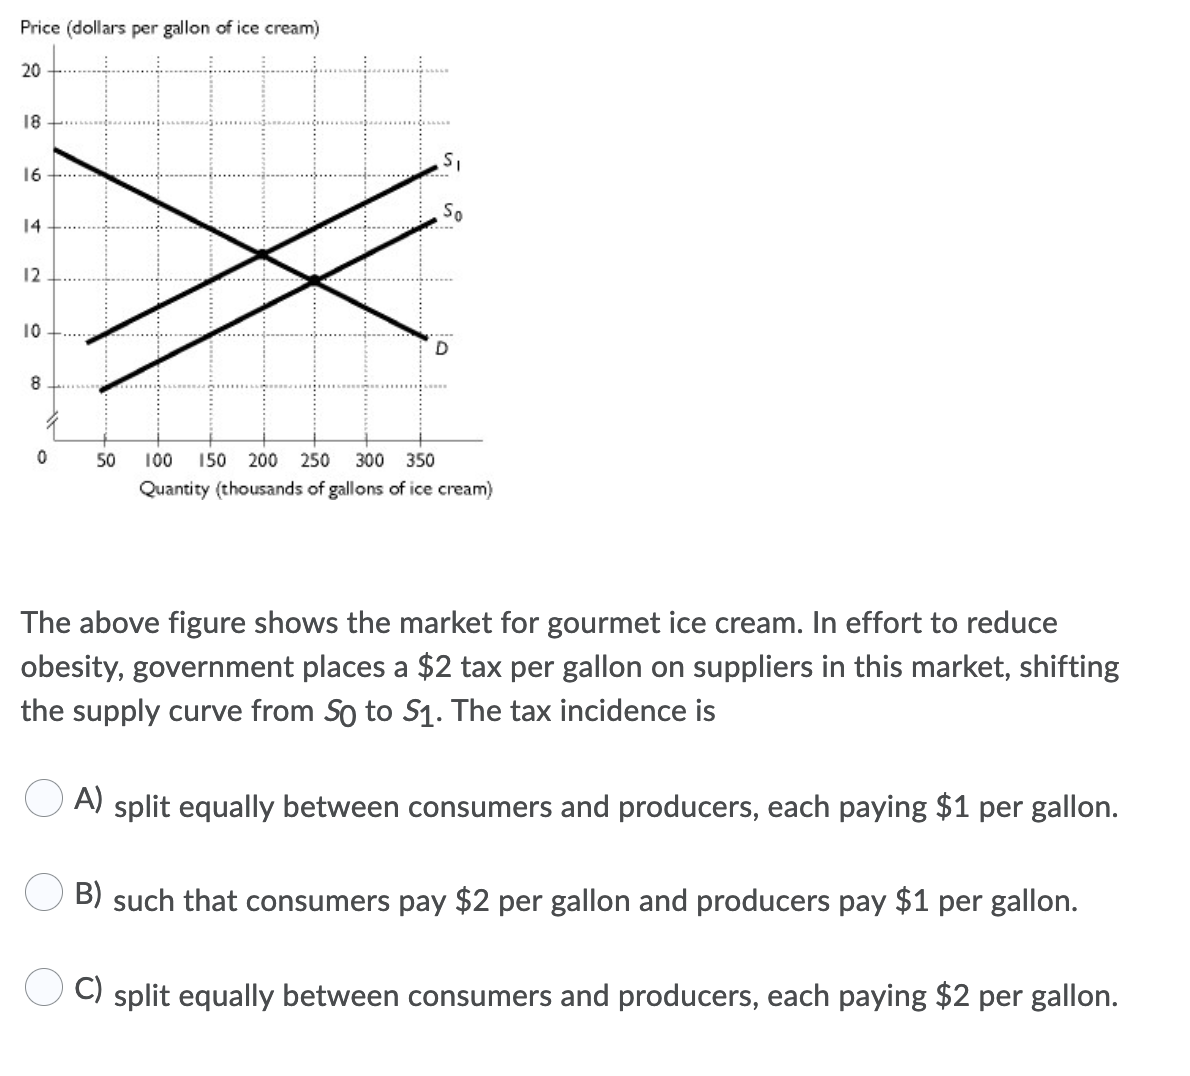 Price (dollars per gallon of ice cream)
20
18
16
14
12
10
8
50
100
150
200
250
300 350
Quantity (thousands of gallons of ice cream)
The above figure shows the market for gourmet ice cream. In effort to reduce
obesity, government places a $2 tax per gallon on suppliers in this market, shifting
the supply curve from So to S1. The tax incidence is
A) split equally between consumers and producers, each paying $1 per gallon.
B) such that consumers pay $2 per gallon and producers pay $1 per gallon.
C) split equally between consumers and producers, each paying $2 per gallon.
